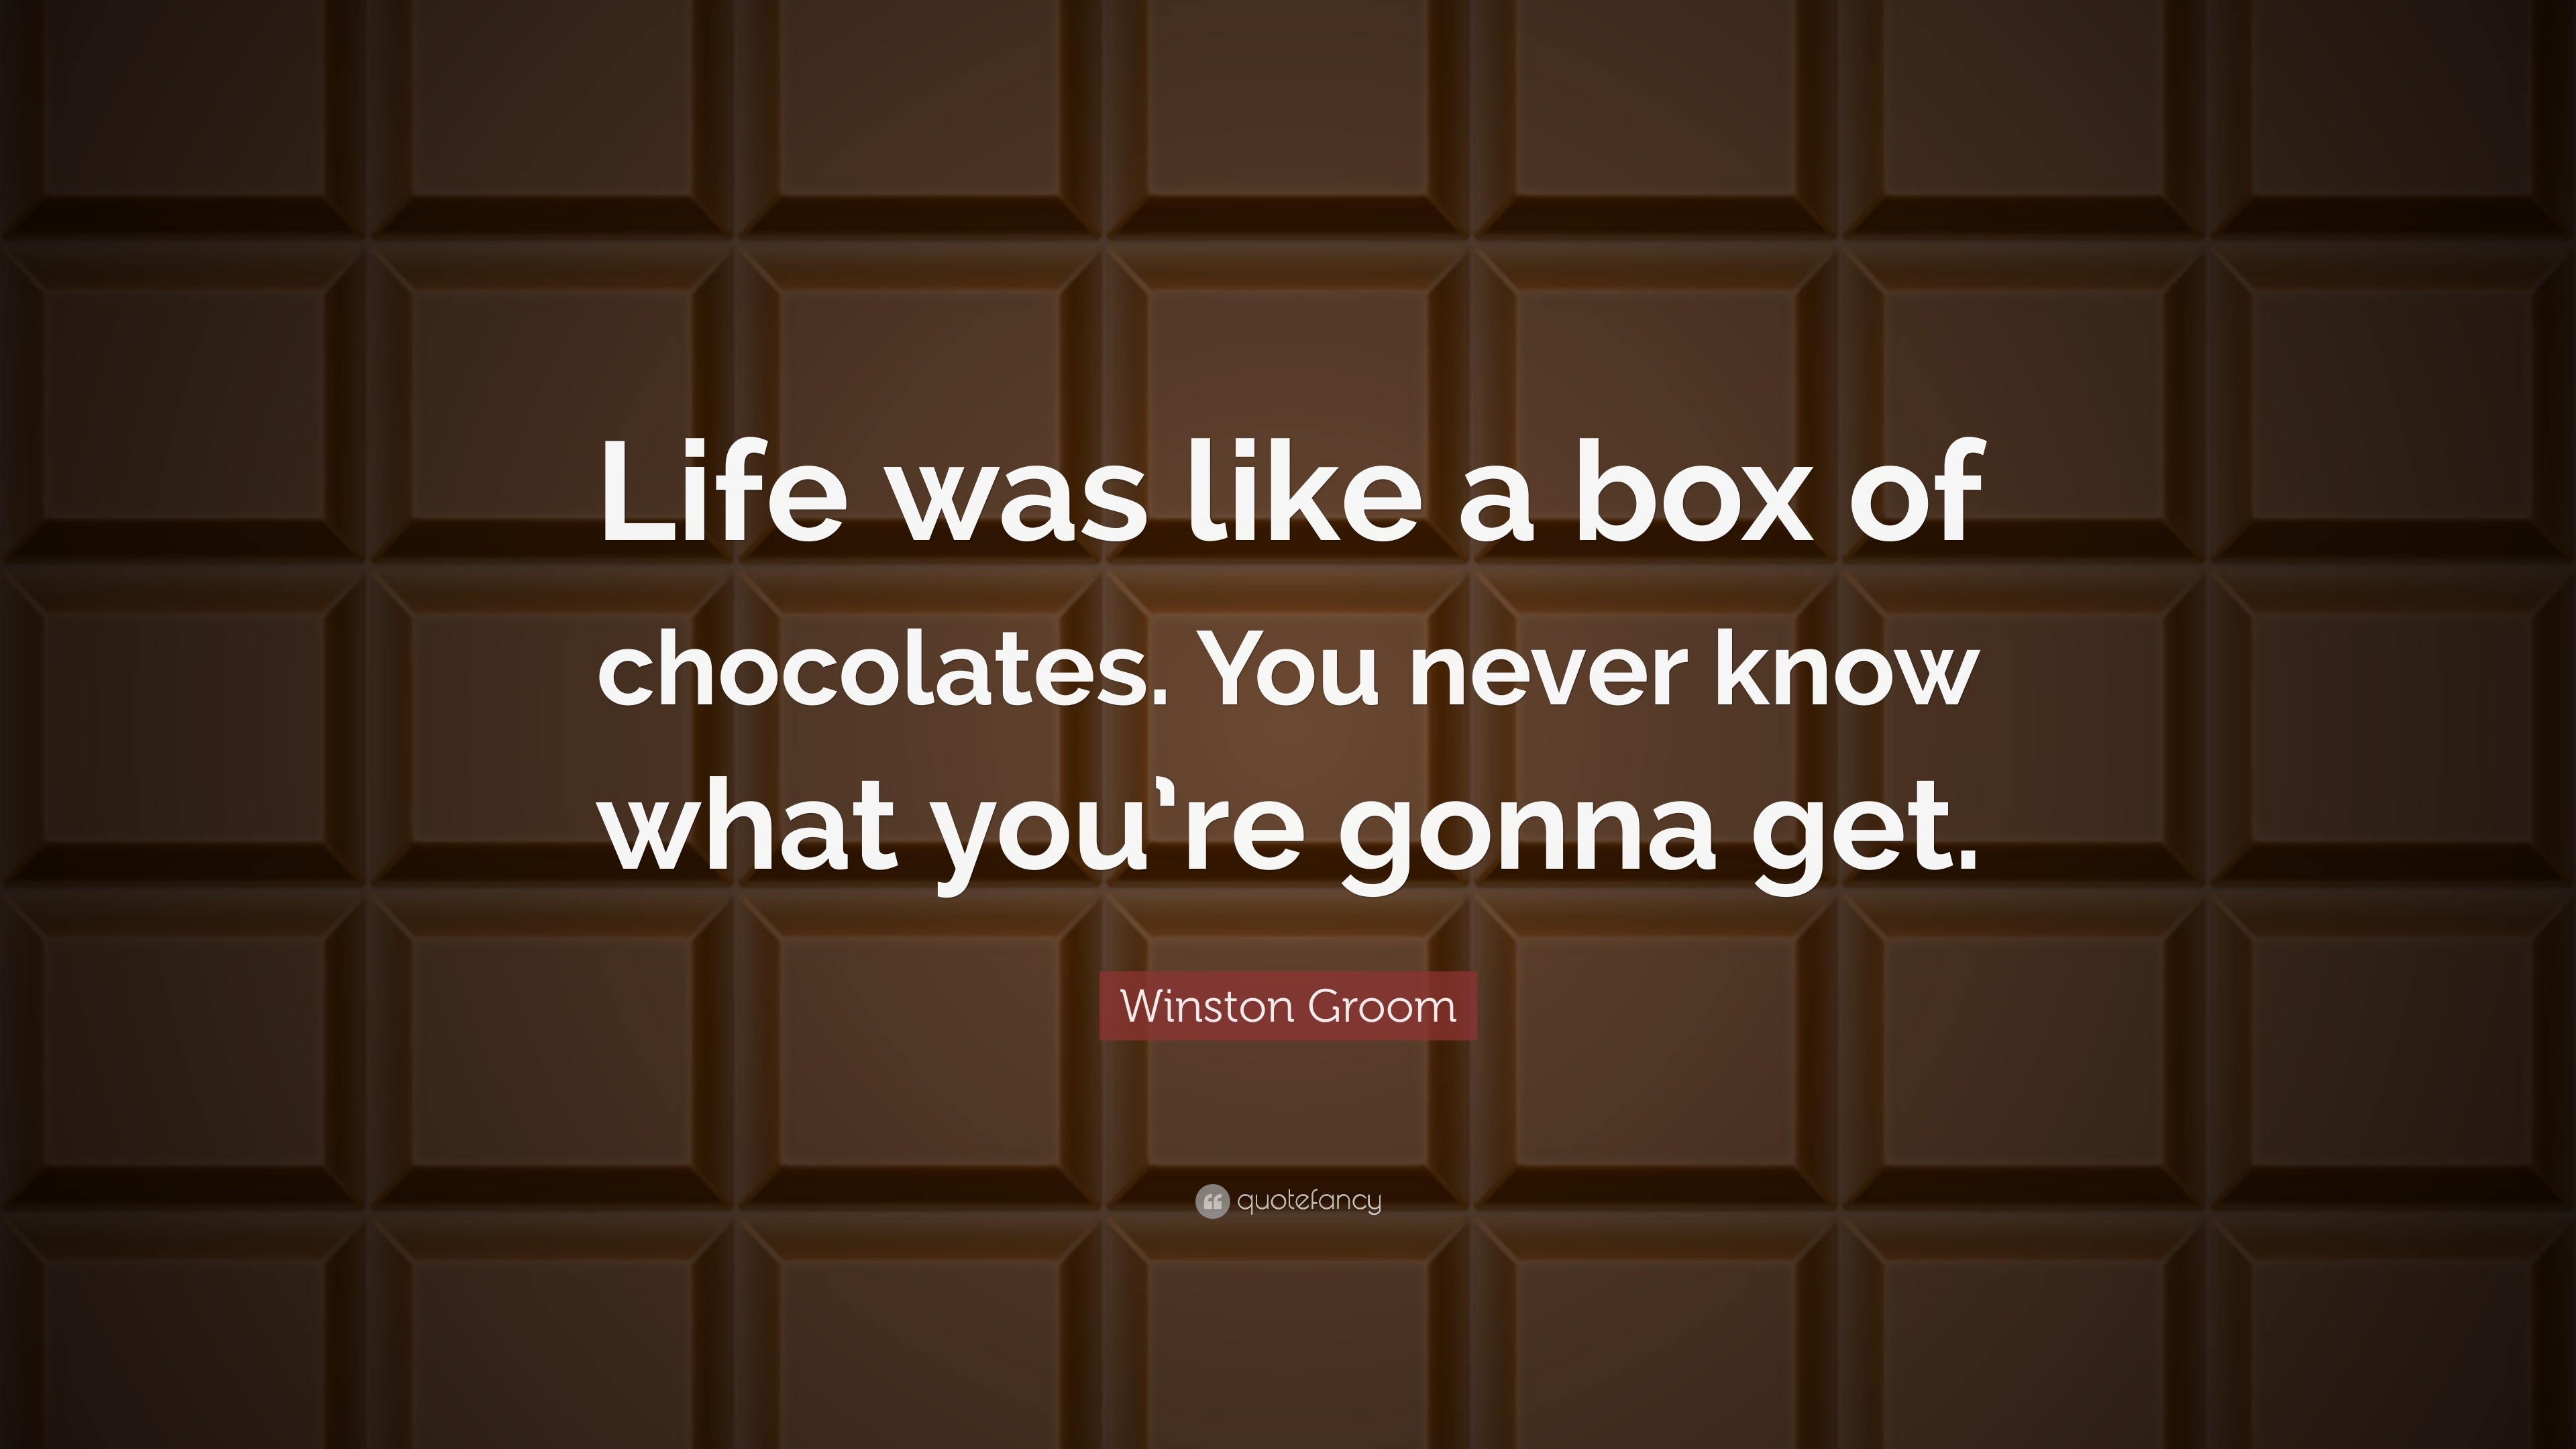 Winston Groom Quote “life Was Like A Box Of Chocolates You Never Know